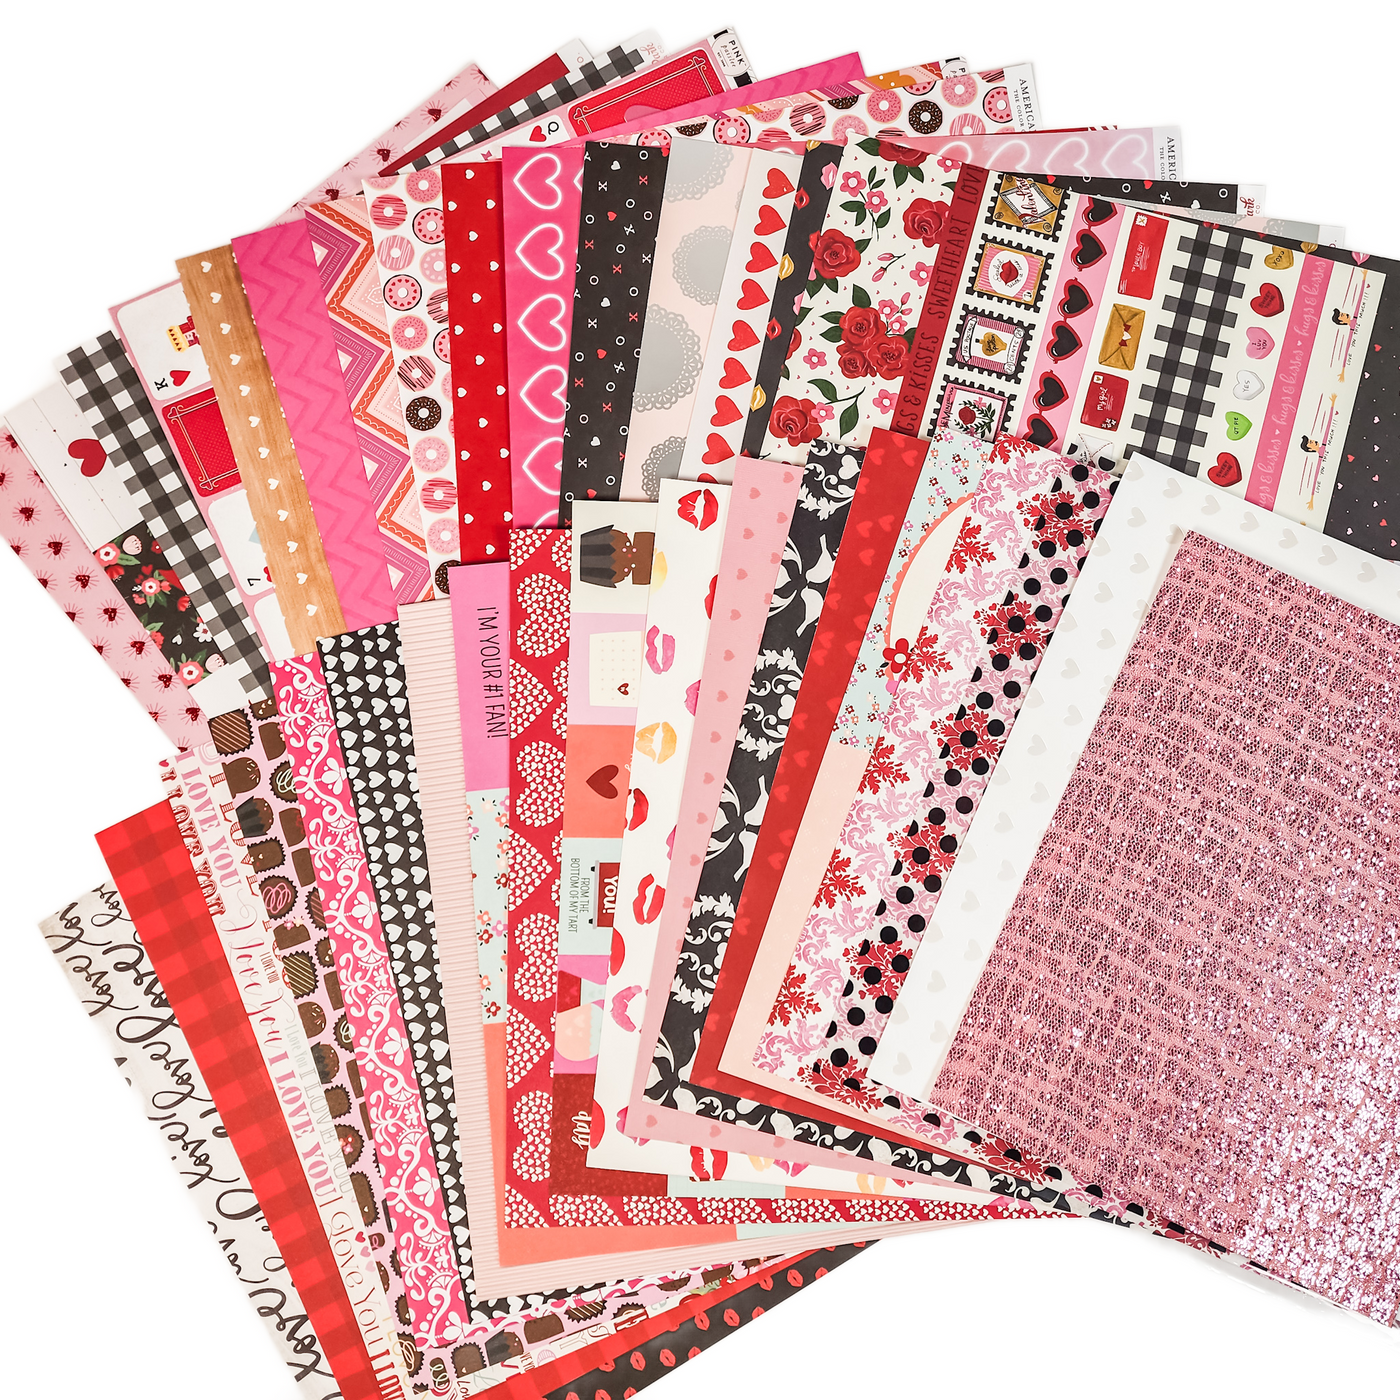 Valentine's Day Patterned Paper Variety Pack includes 35 sheets of cardstock pattern paper for Valentine projects, including red, white, pink patterns, glitter accents, and more. 